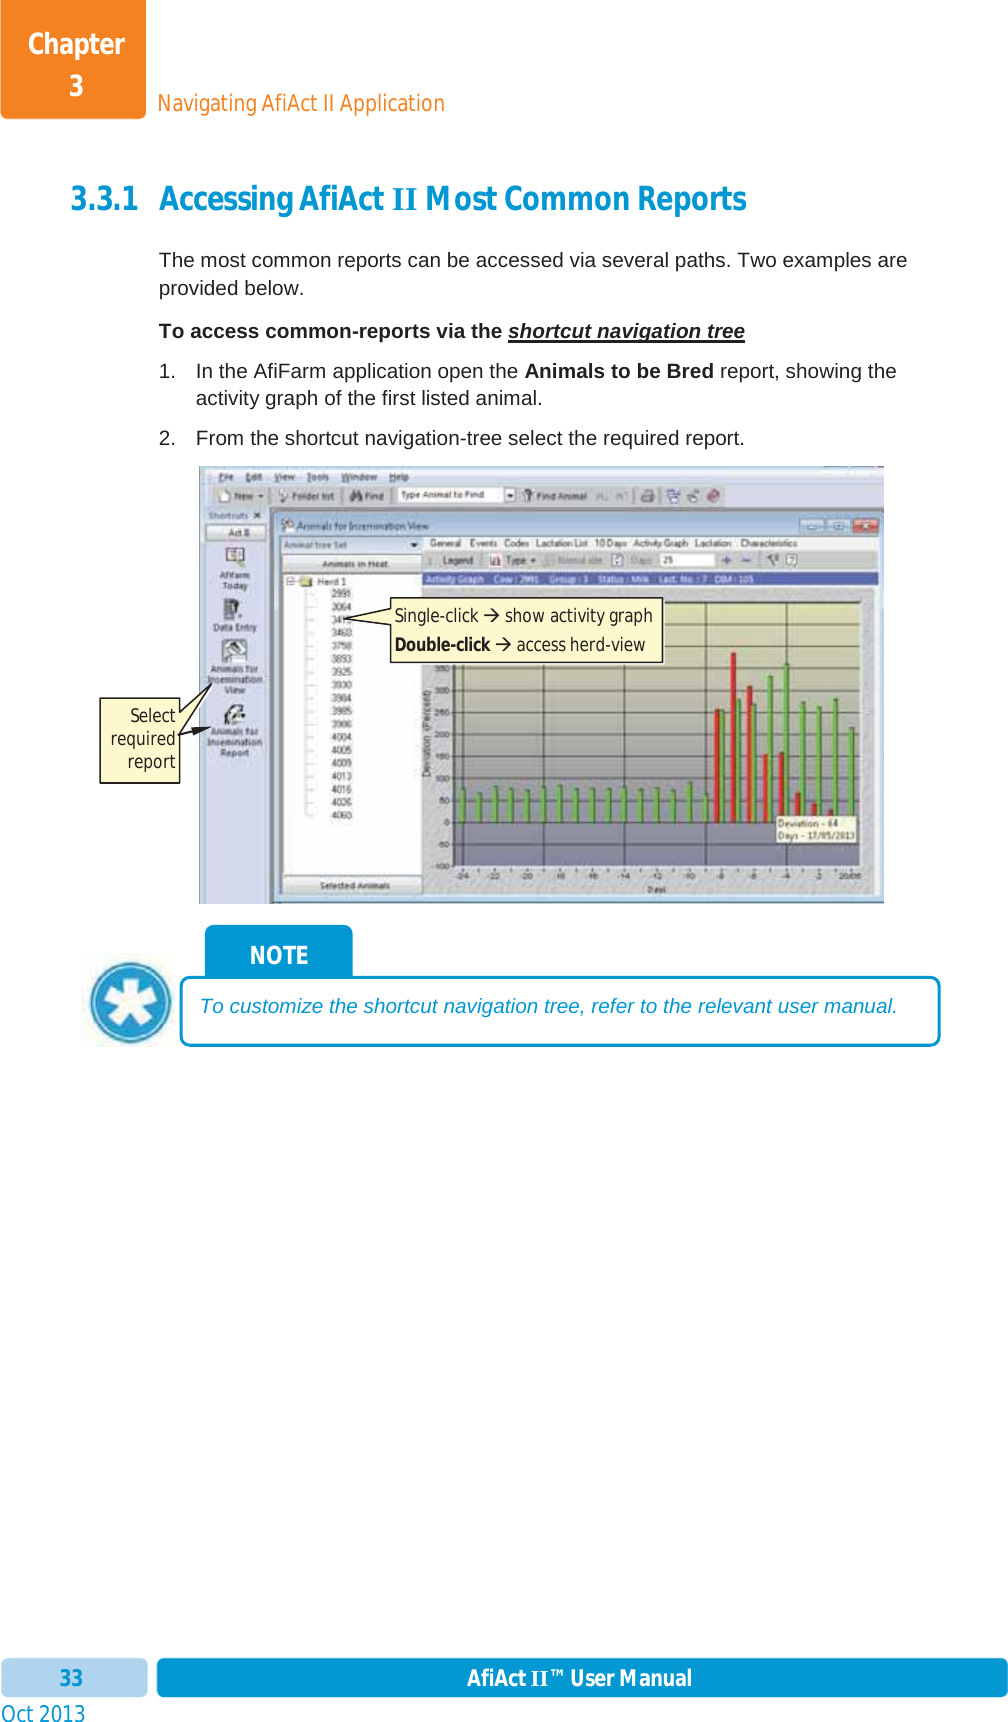 Oct 2013 AfiAct II™ User Manual33Navigating AfiAct II ApplicationChapter 33.3.1 Accessing AfiAct II Most Common Reports The most common reports can be accessed via several paths. Two examples are provided below. To access common-reports via the shortcut navigation tree1.  In the AfiFarm application open the Animals to be Bred report, showing the activity graph of the first listed animal. 2.  From the shortcut navigation-tree select the required report. NOTE To customize the shortcut navigation tree, refer to the relevant user manual. Single-click Æ show activity graph Double-click Æ access herd-view  Select required report 